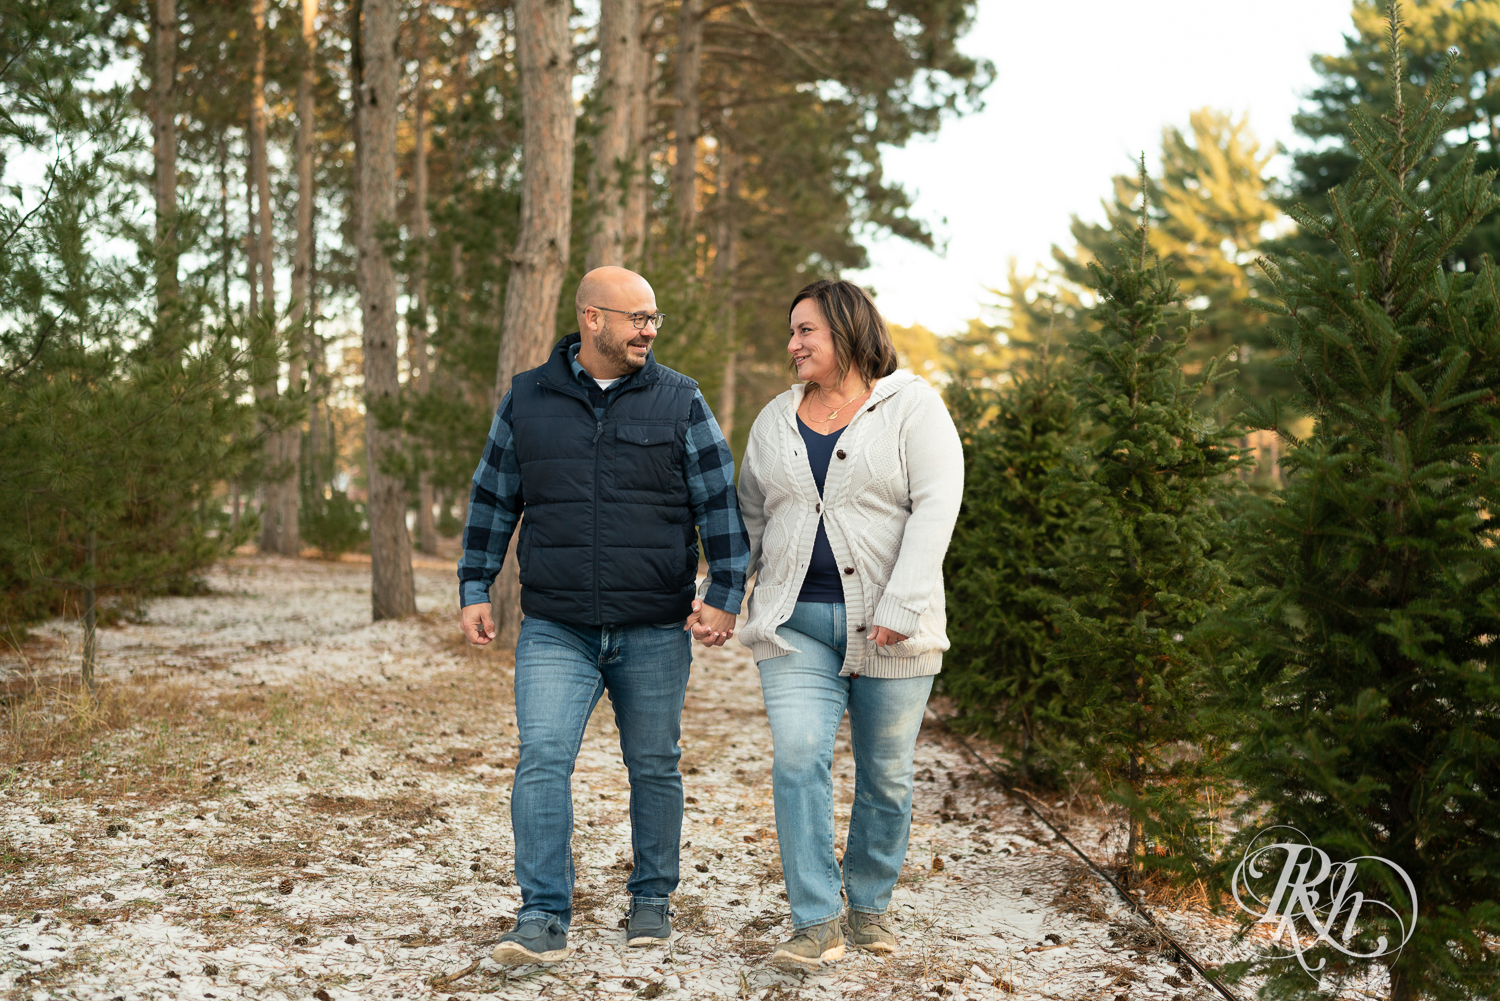 Black man and white woman walk holding hands and laughing at Hansen Tree Farm in Anoka, Minnesota.